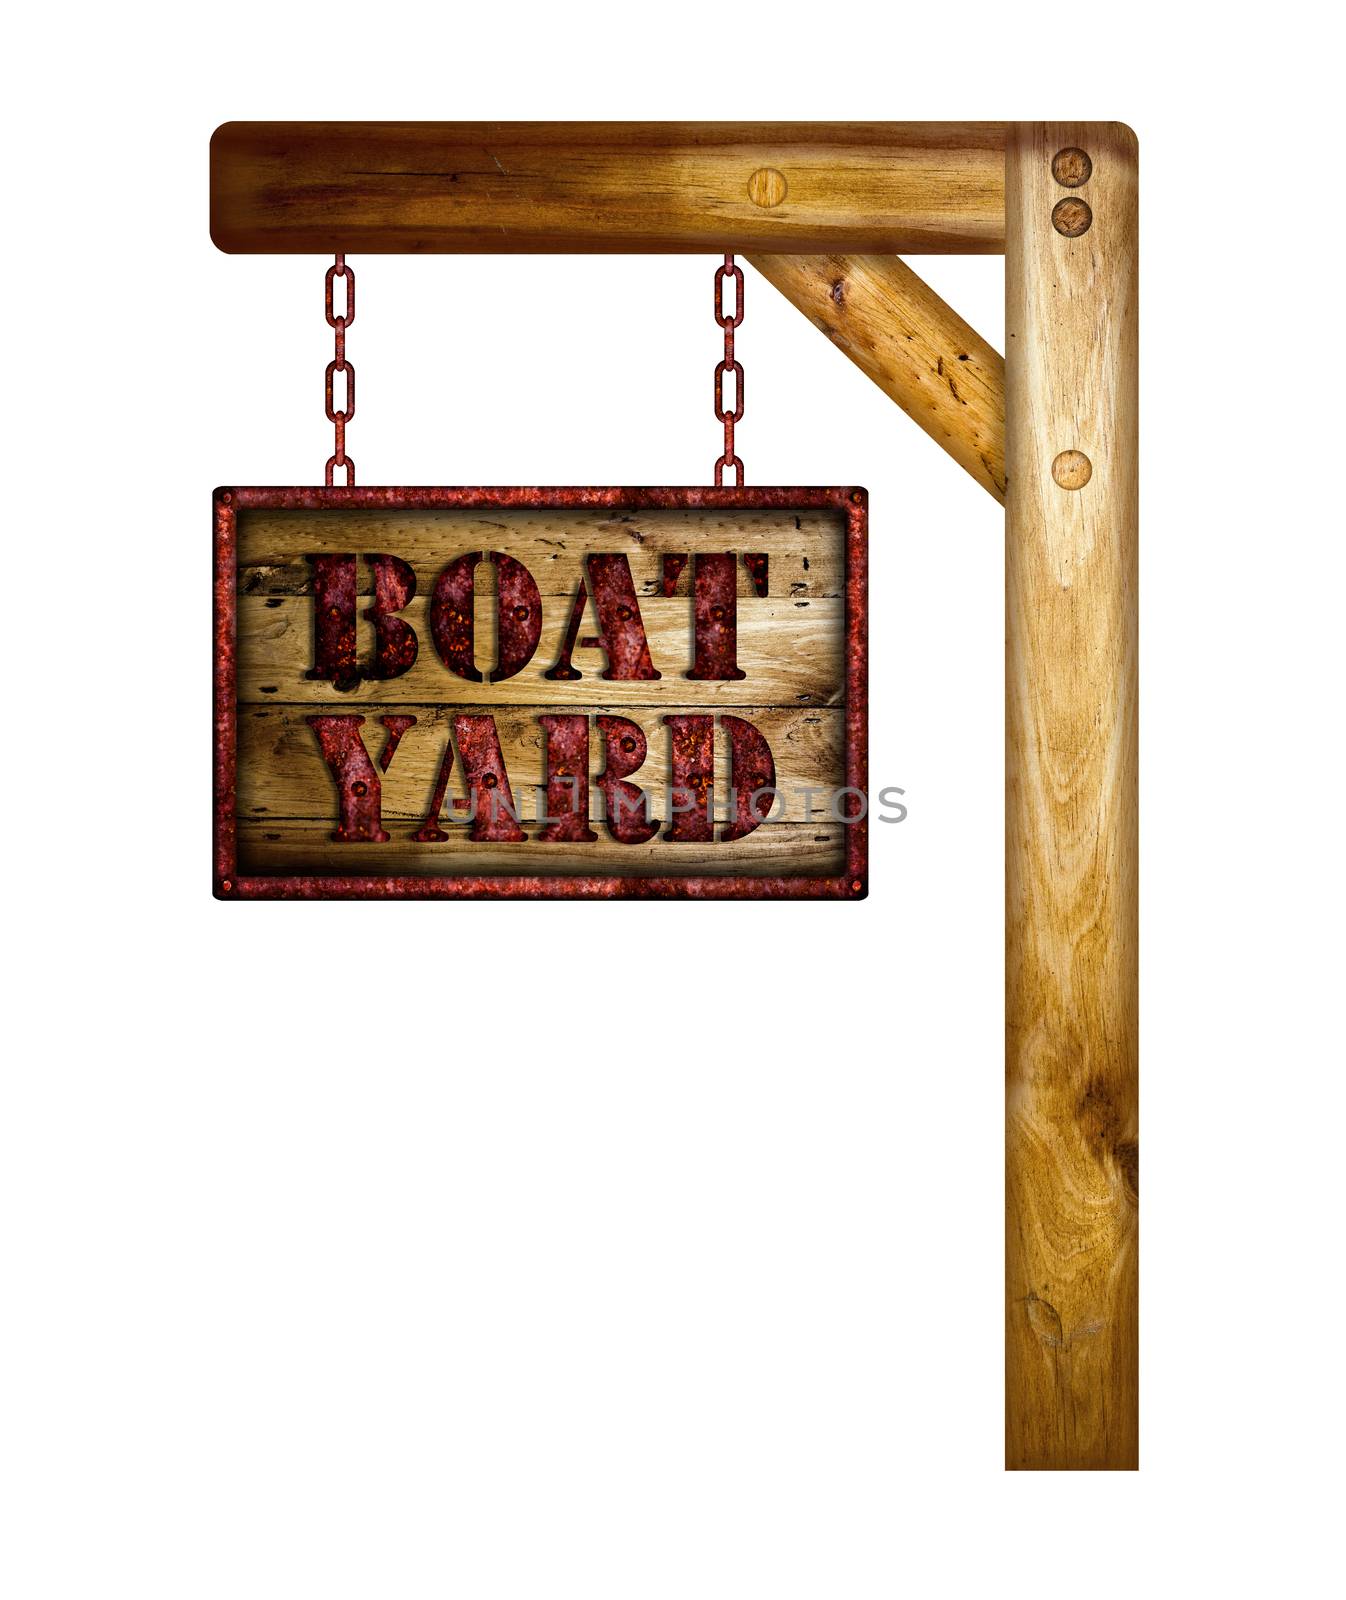 Wooden boat yard sign. by Bluefern